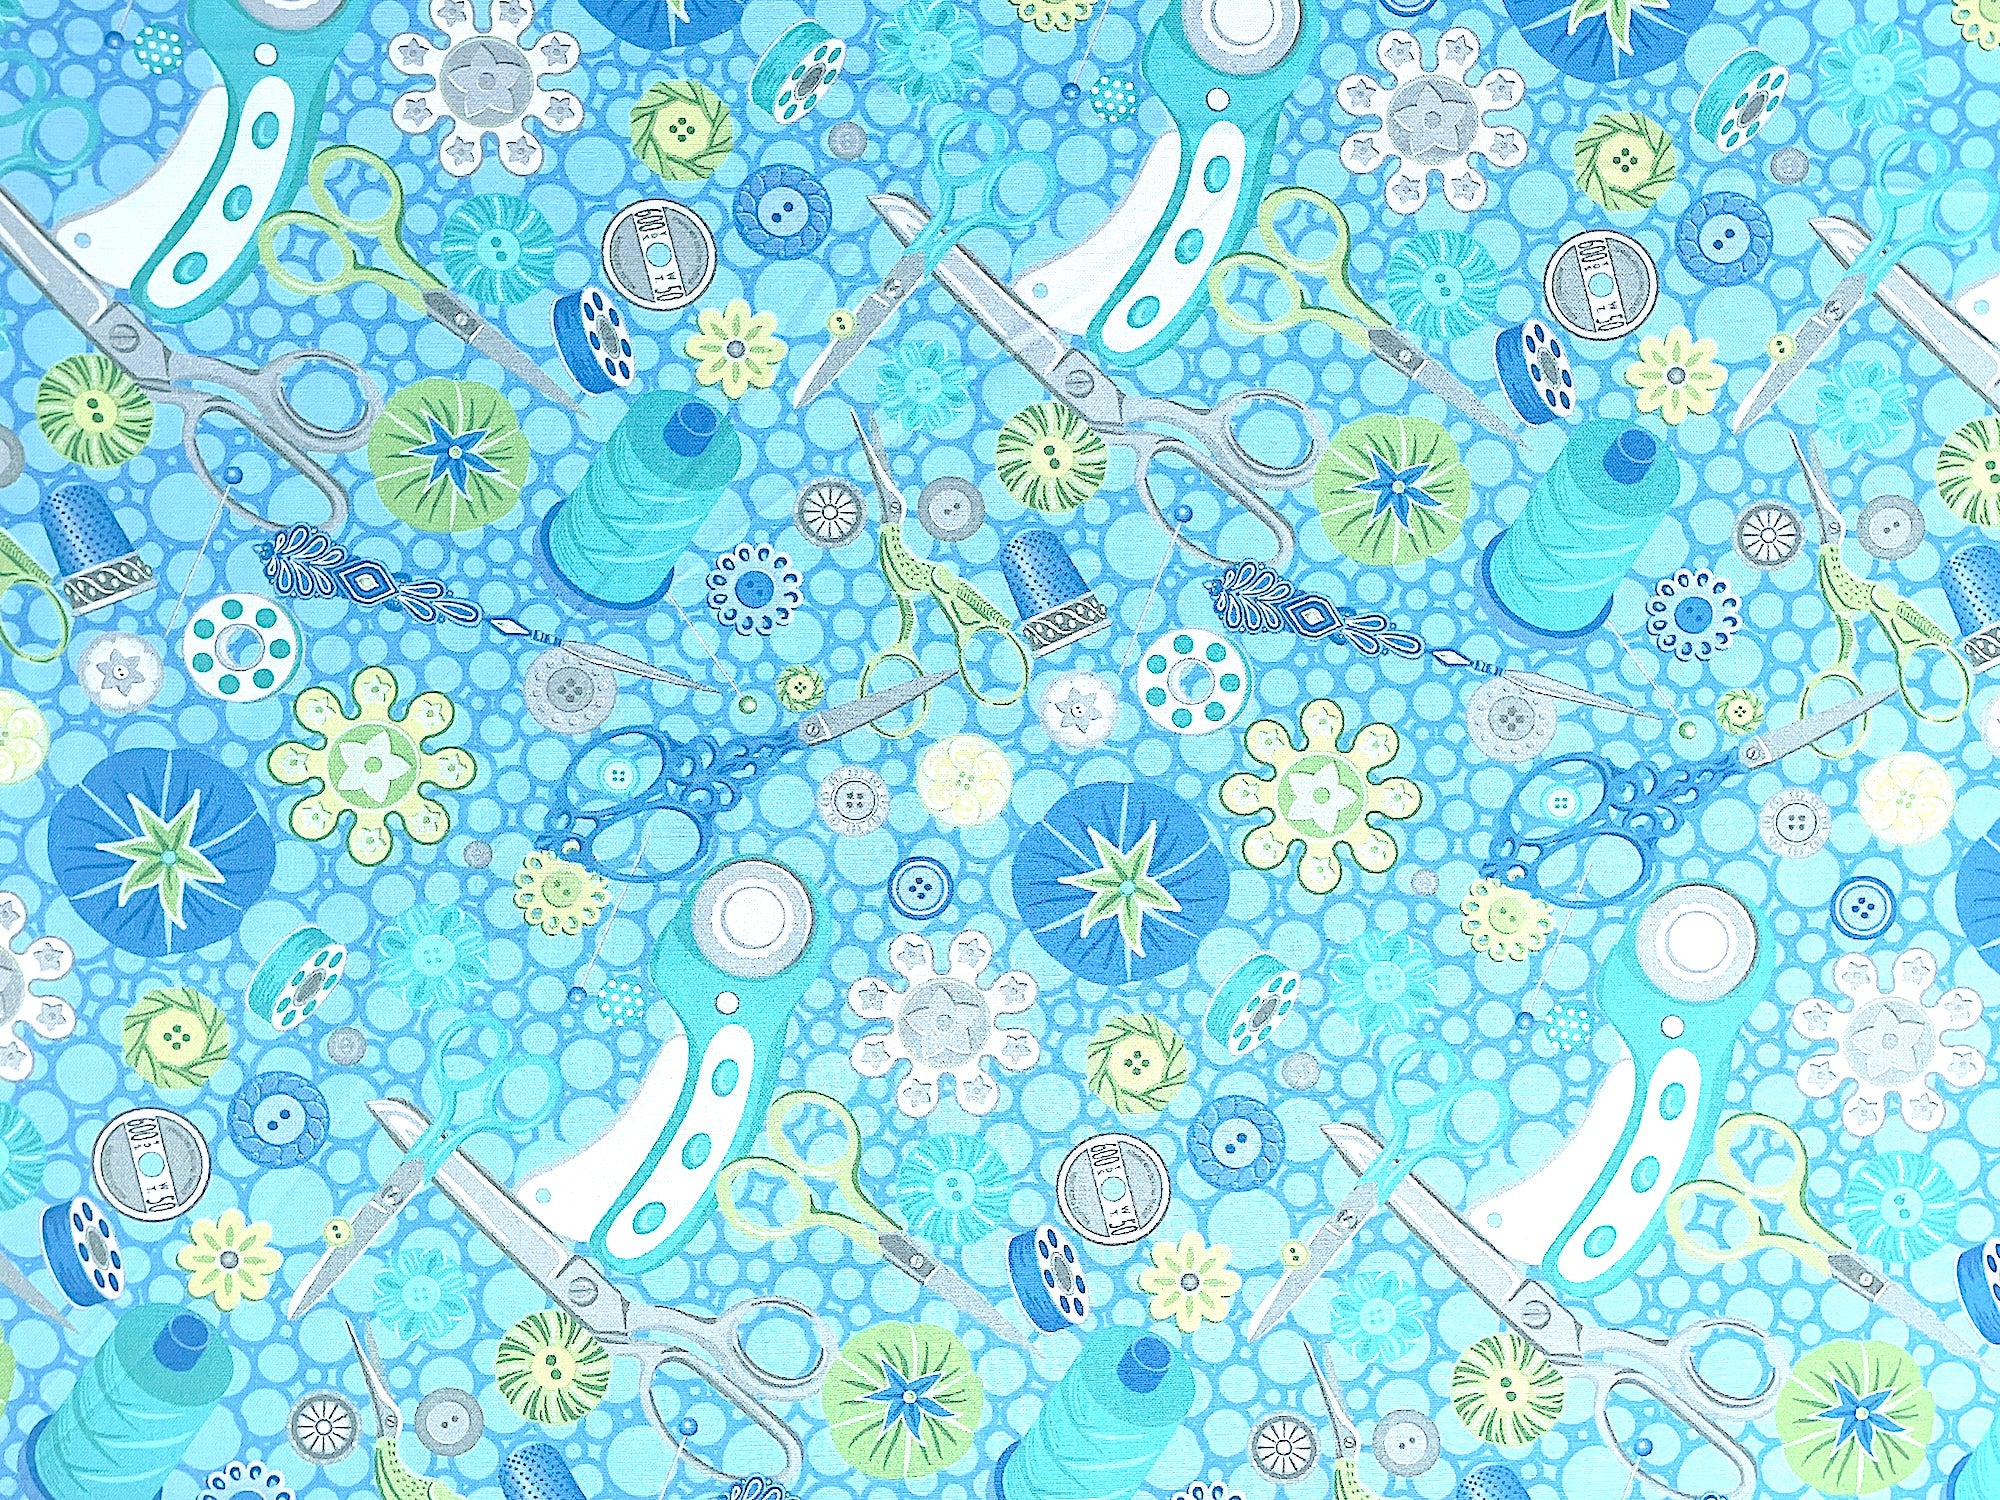 Blue cotton fabric covered with sewing scissors, rotary cutters, thread and other sewing tools.